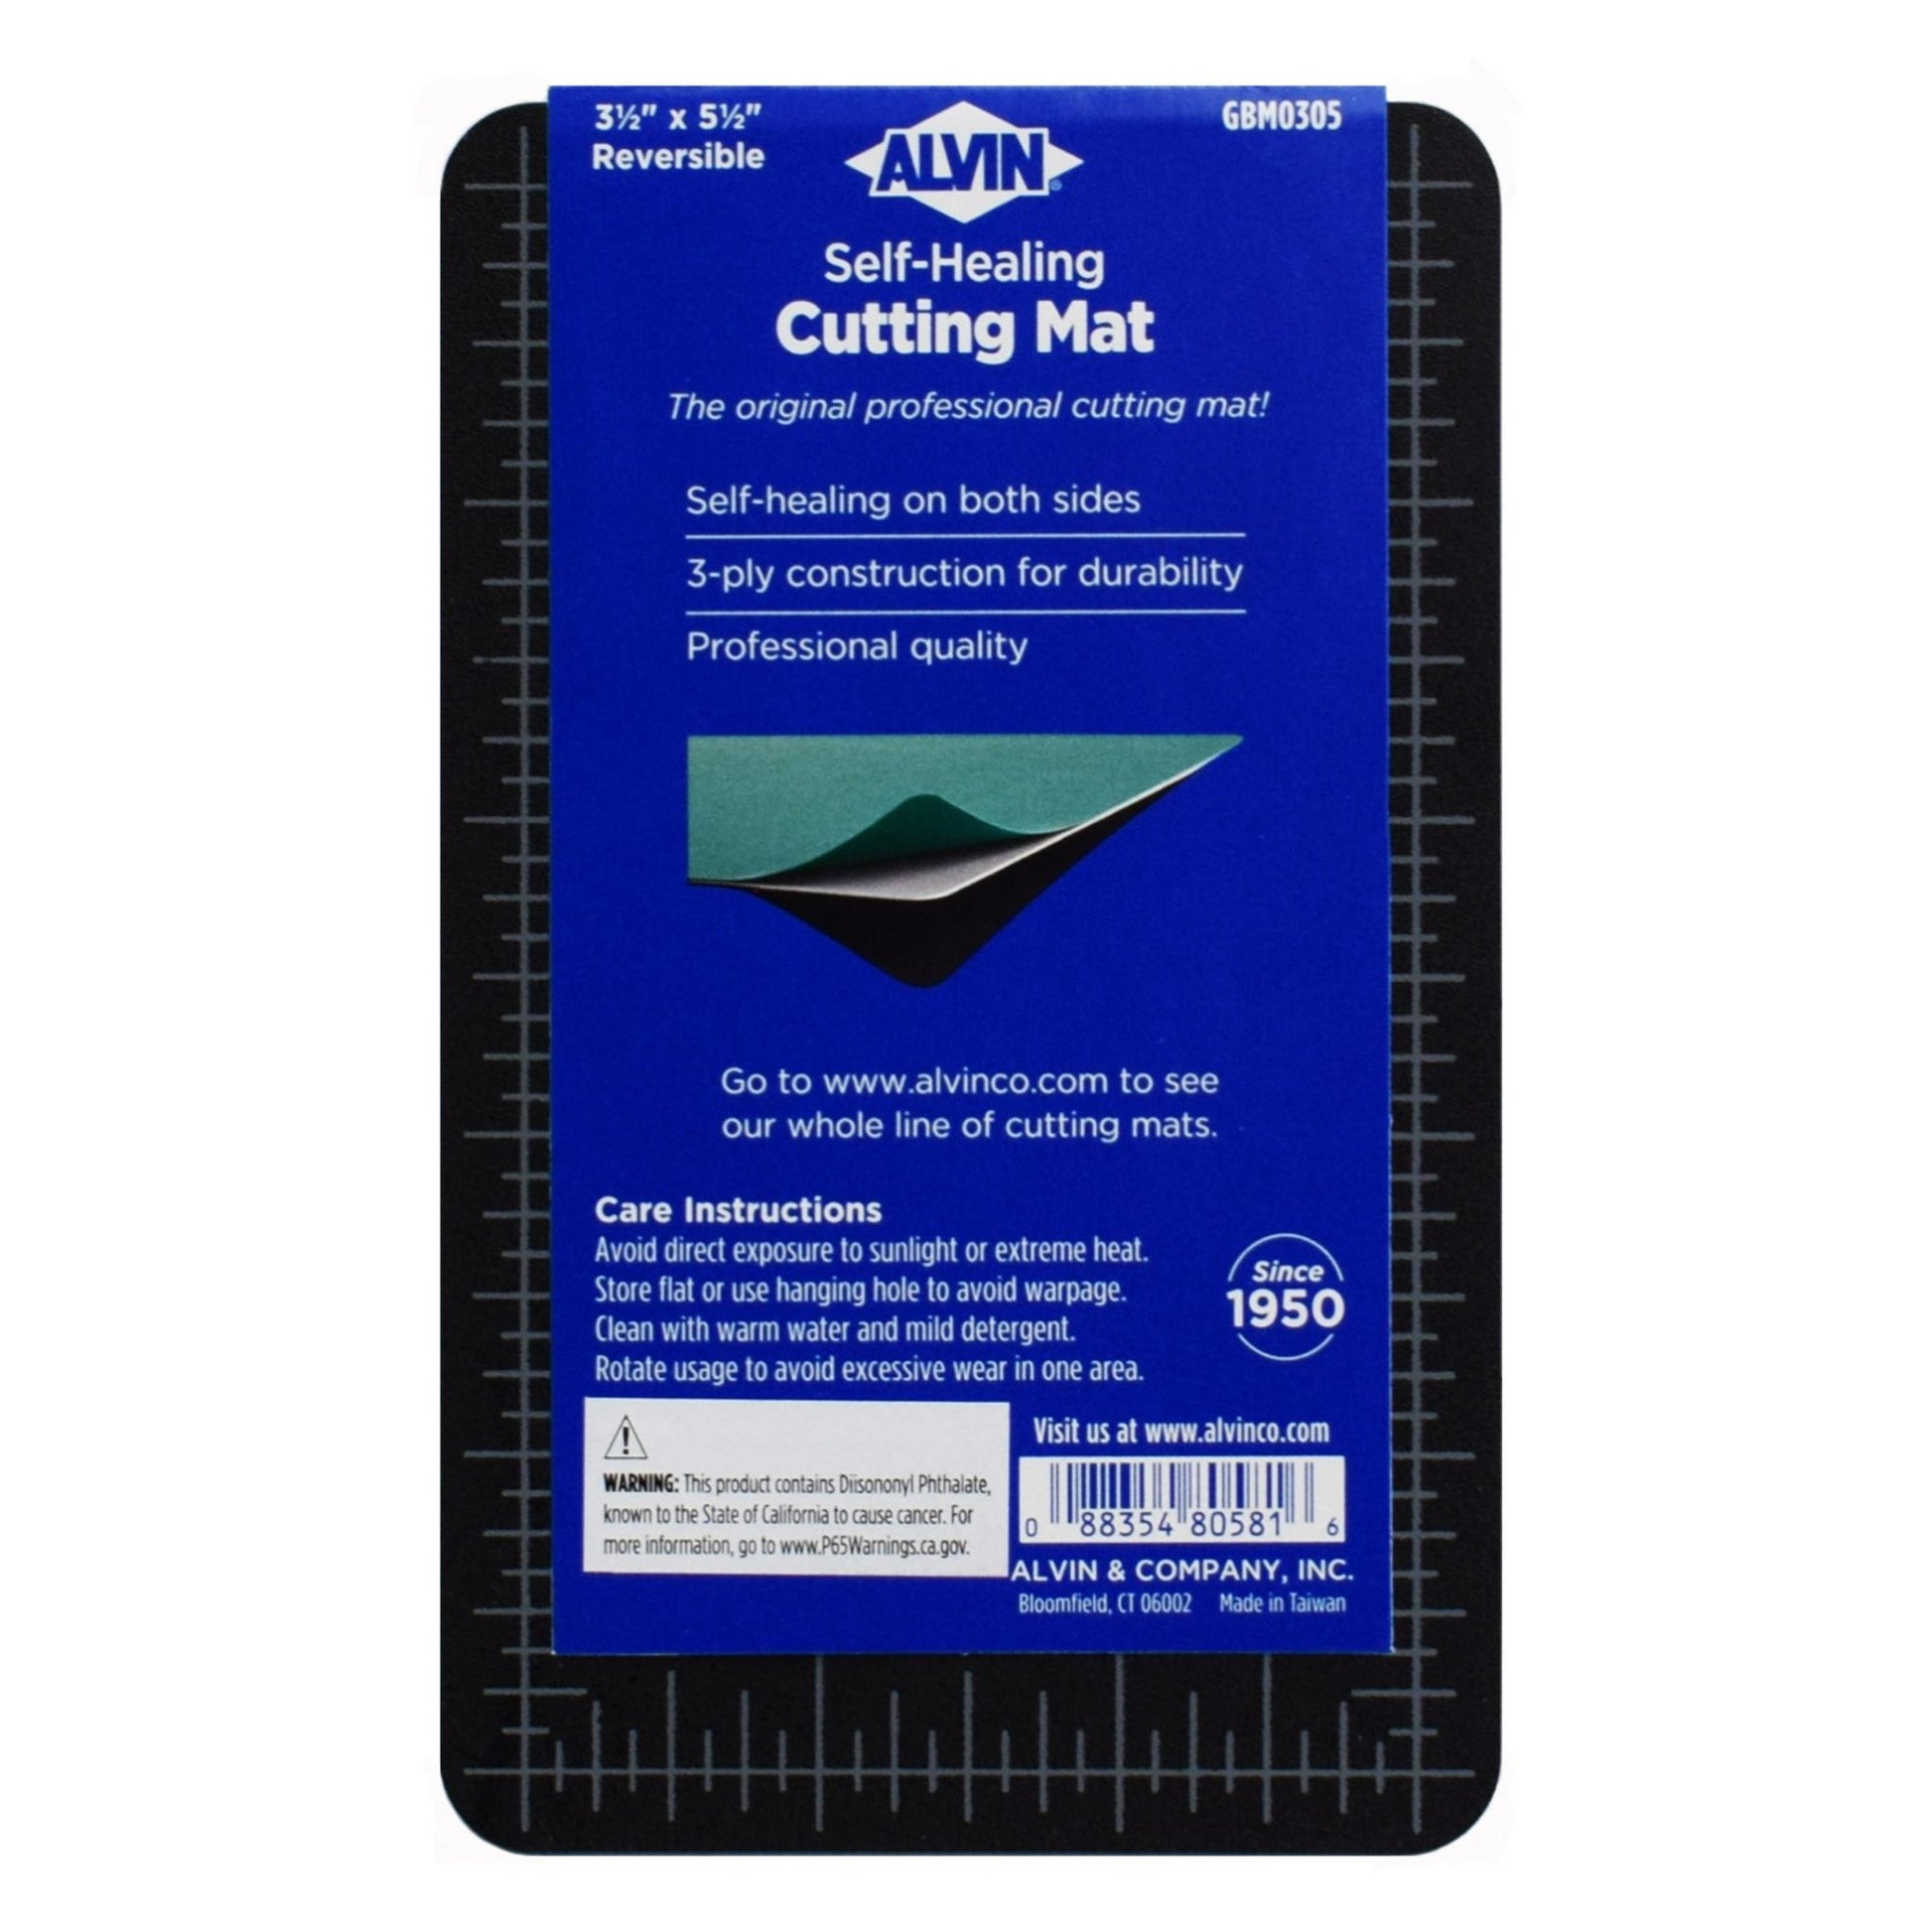 ALVIN GBM Series Professional Self-Healing Cutting Mat, Green/Black  Double-Sided, Rotary Cutting Board for Crafts, Sewing, Fabric - 3.5 x 5.5  inches​